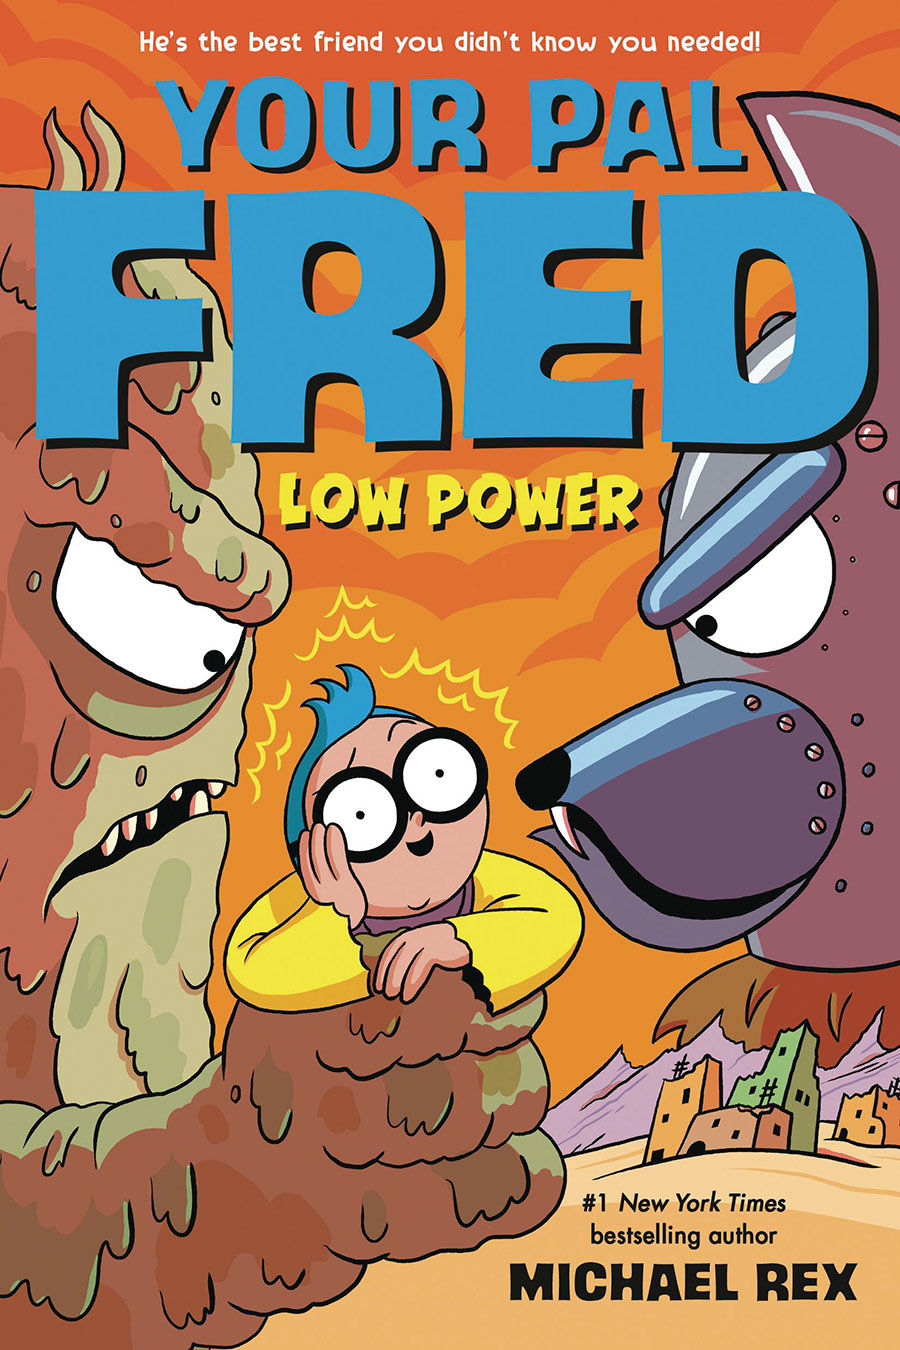 Your Pal Fred Low Power TP